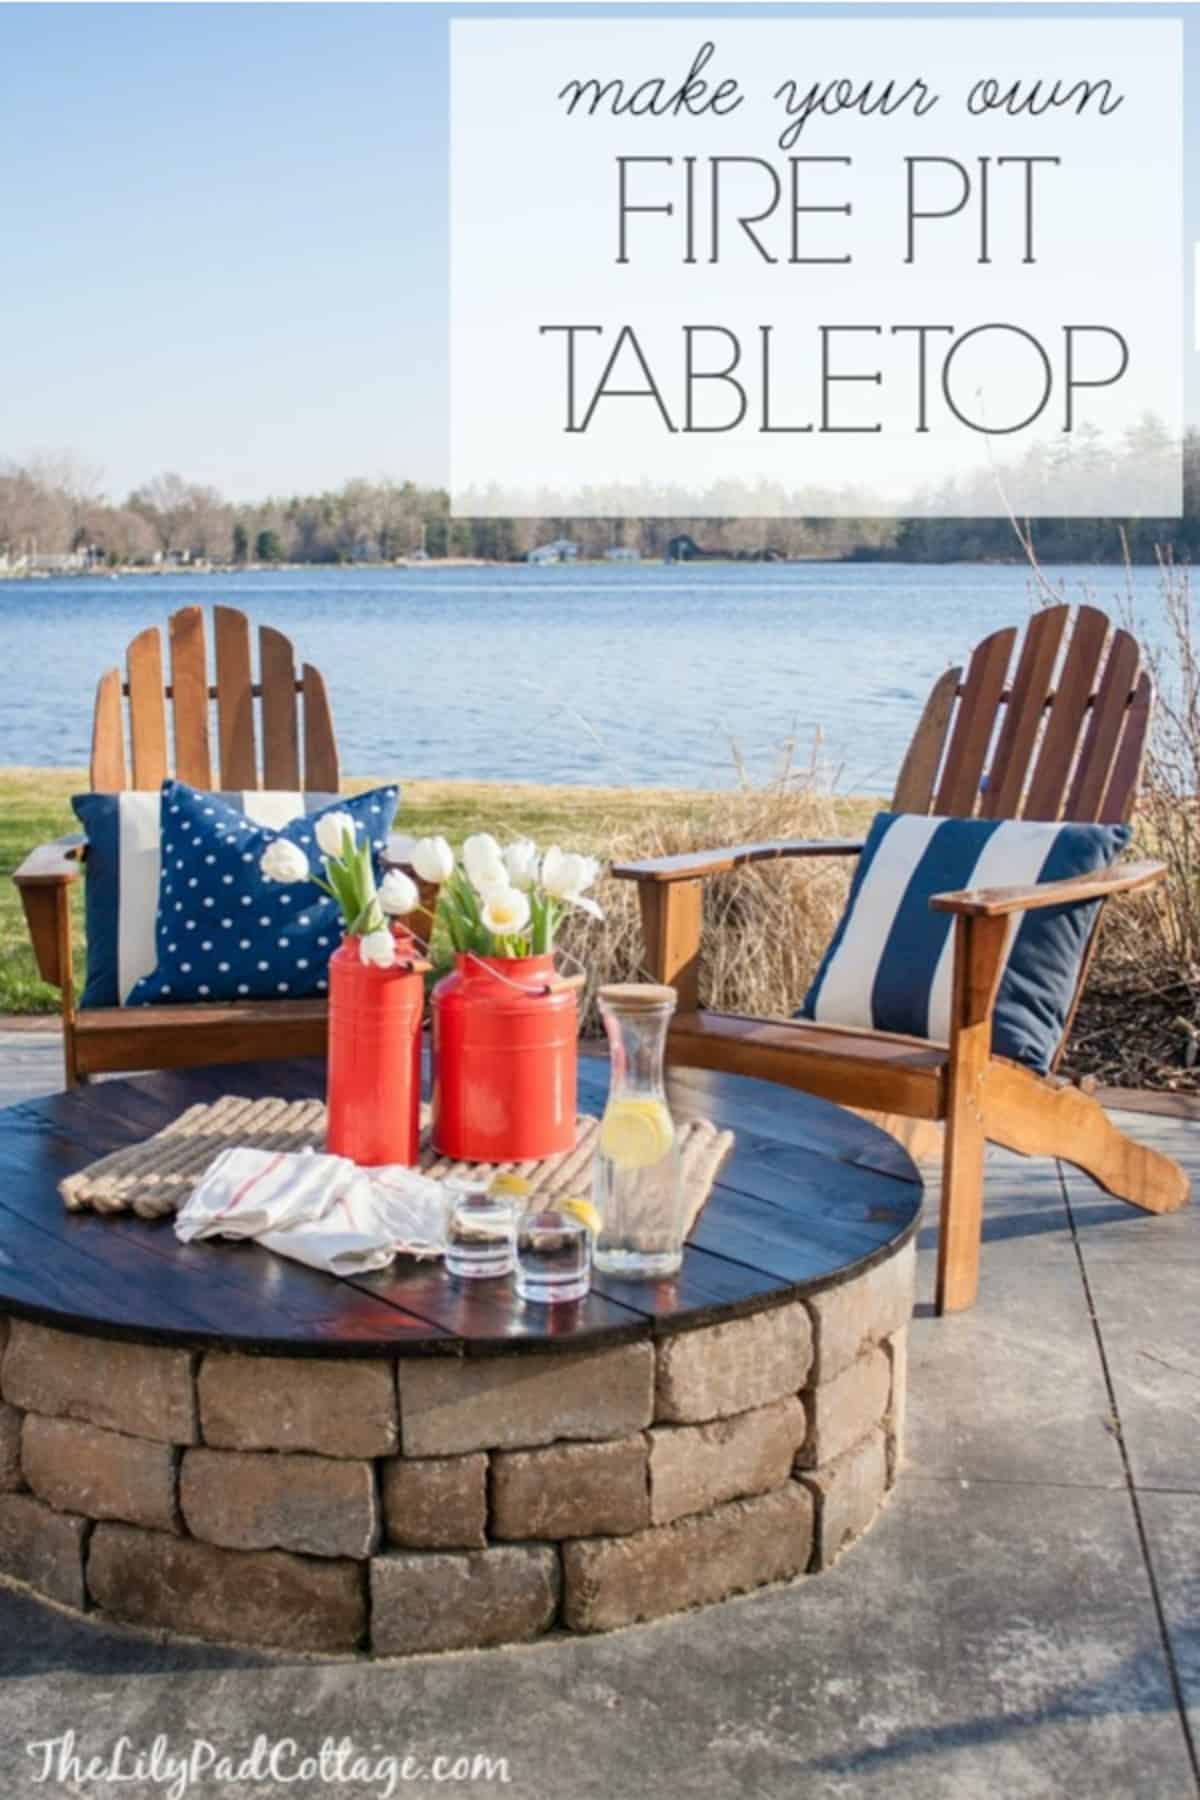 DIY Fire Pit Table Top